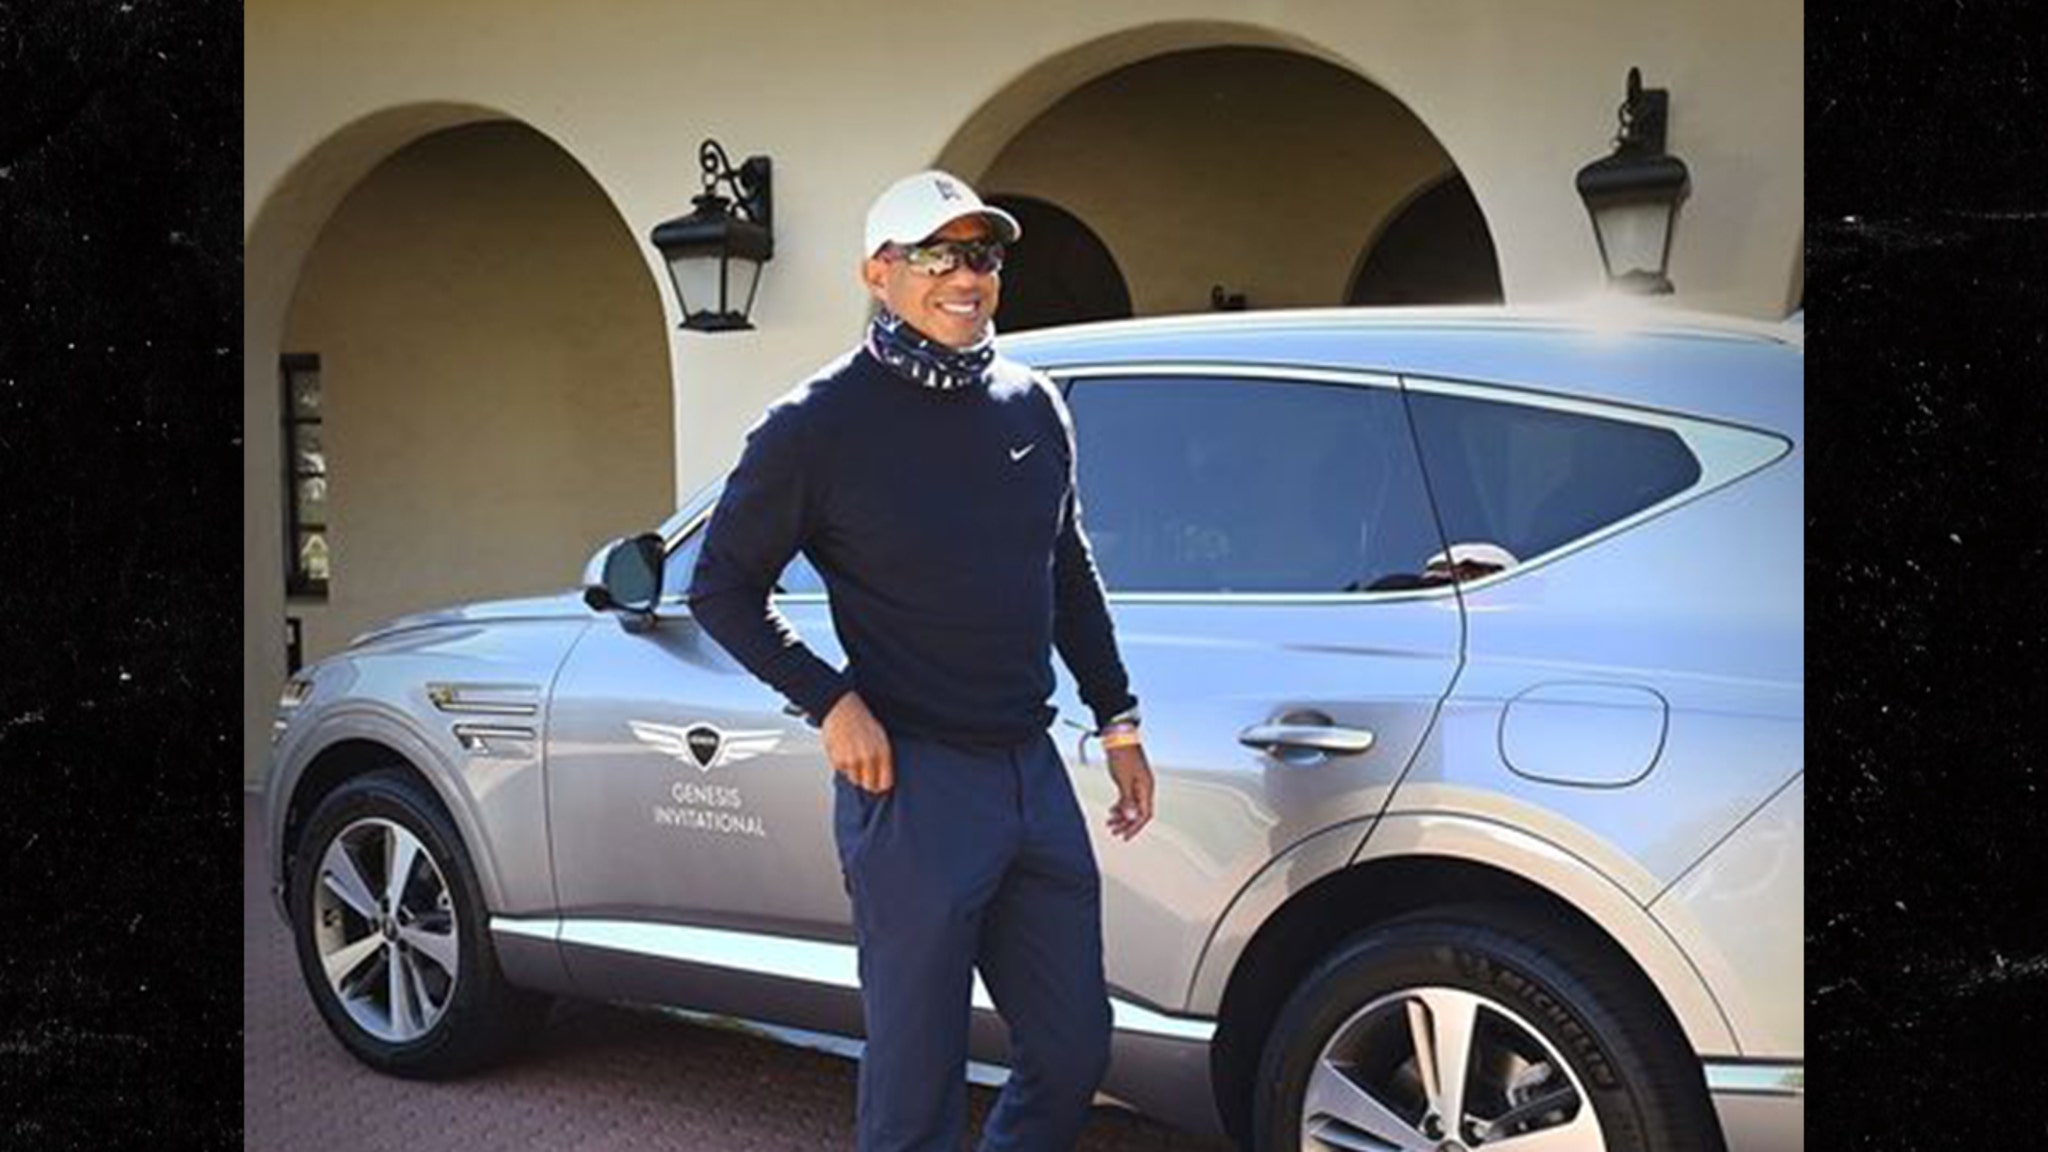 Tiger Woods hit SUV with life-saving safety features